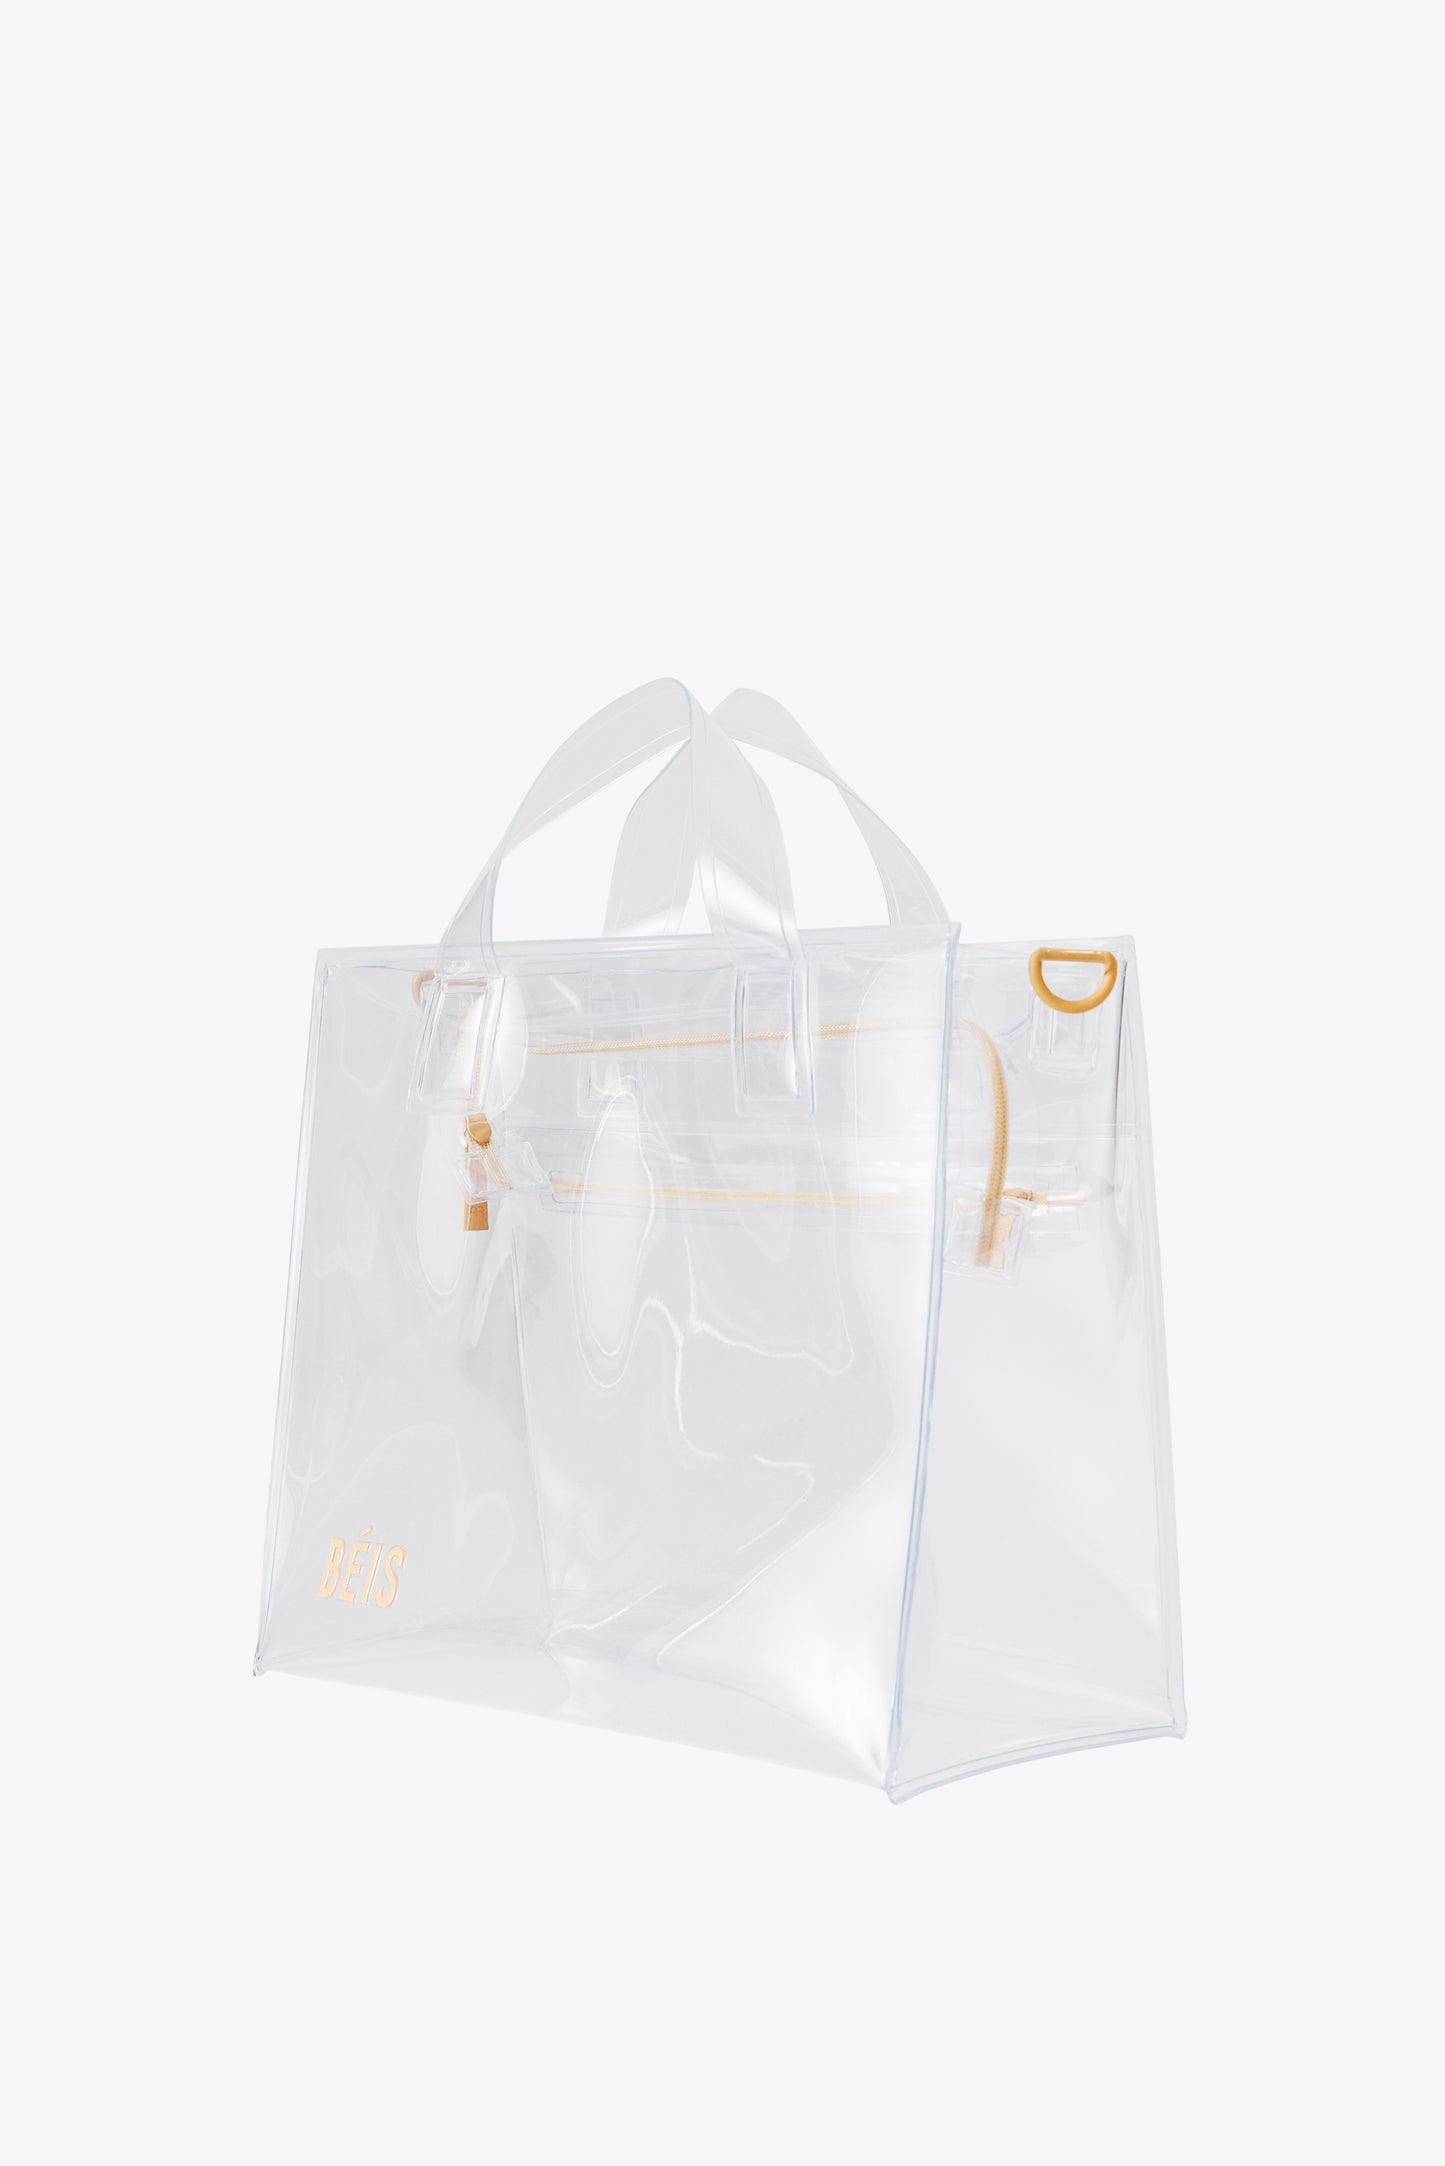 The Stadium Tote in Clear